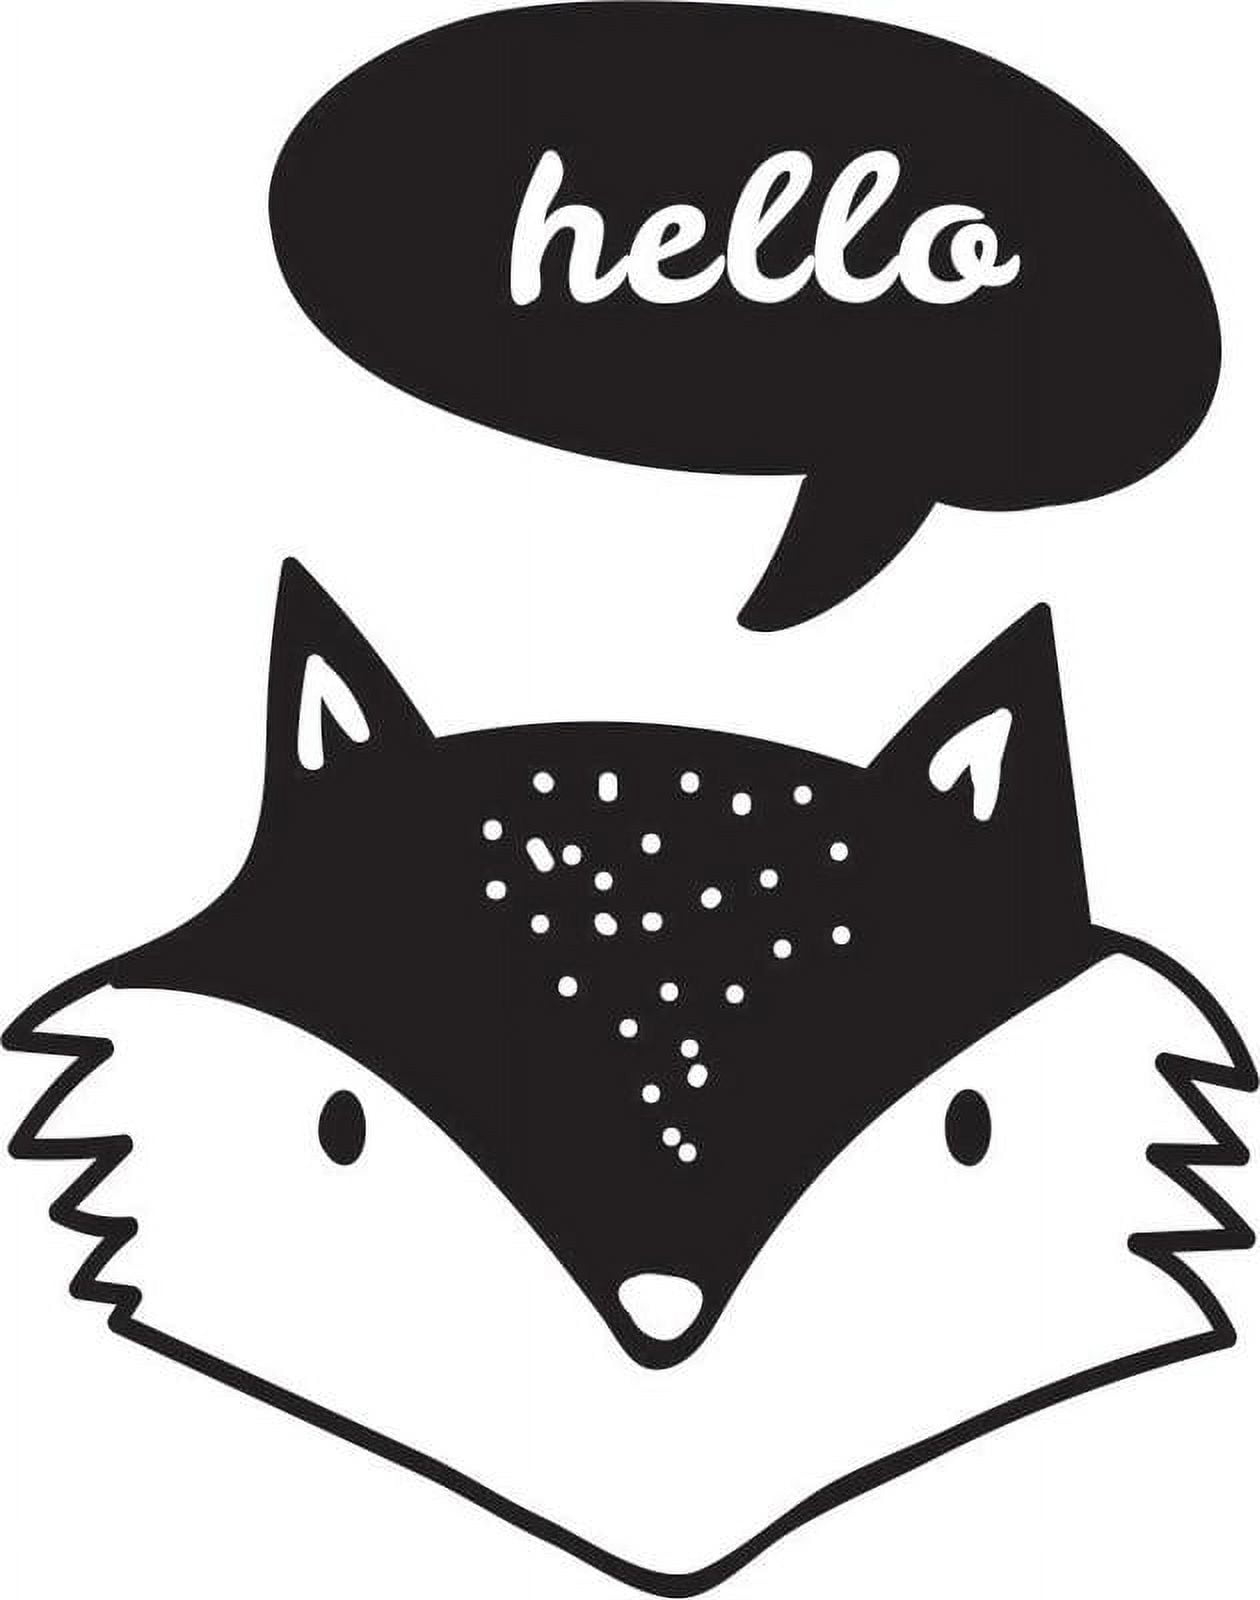 Cute Fox, Sticker and/ or Print (6x6 or 8x8 approx)